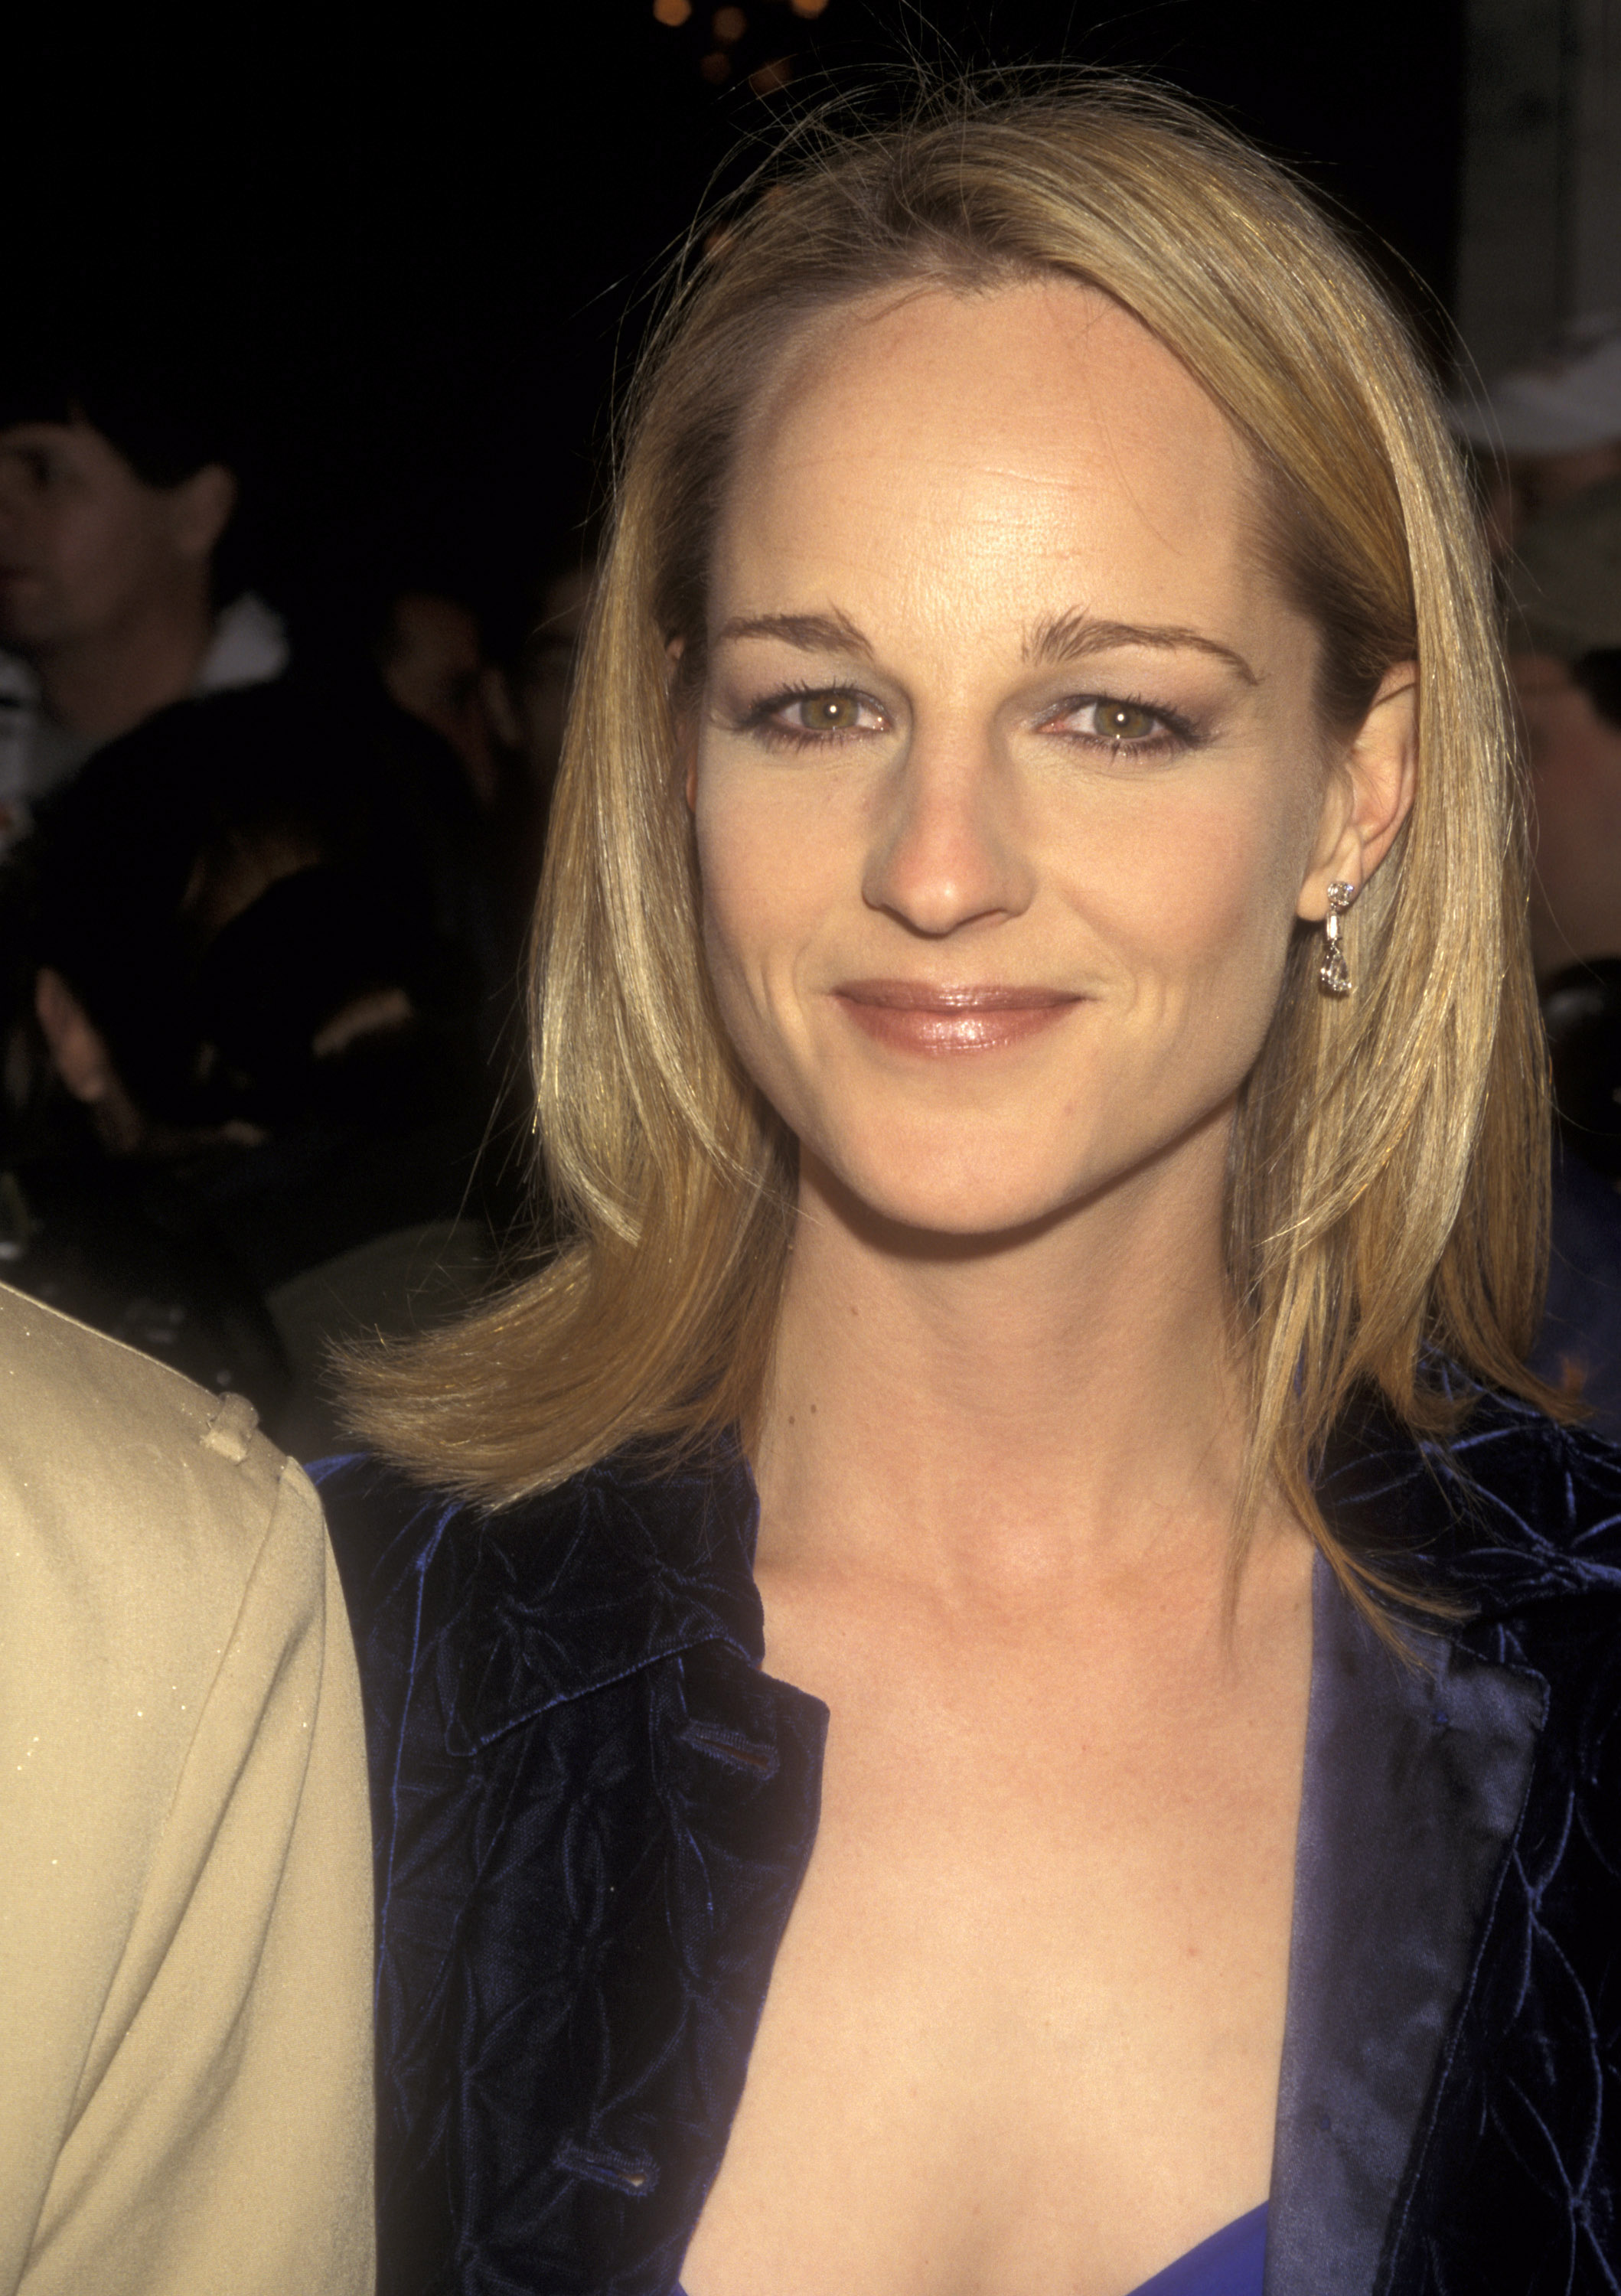 Helen Hunt at the New York City premiere of "Anastasia" 1997 | Source: Getty Images